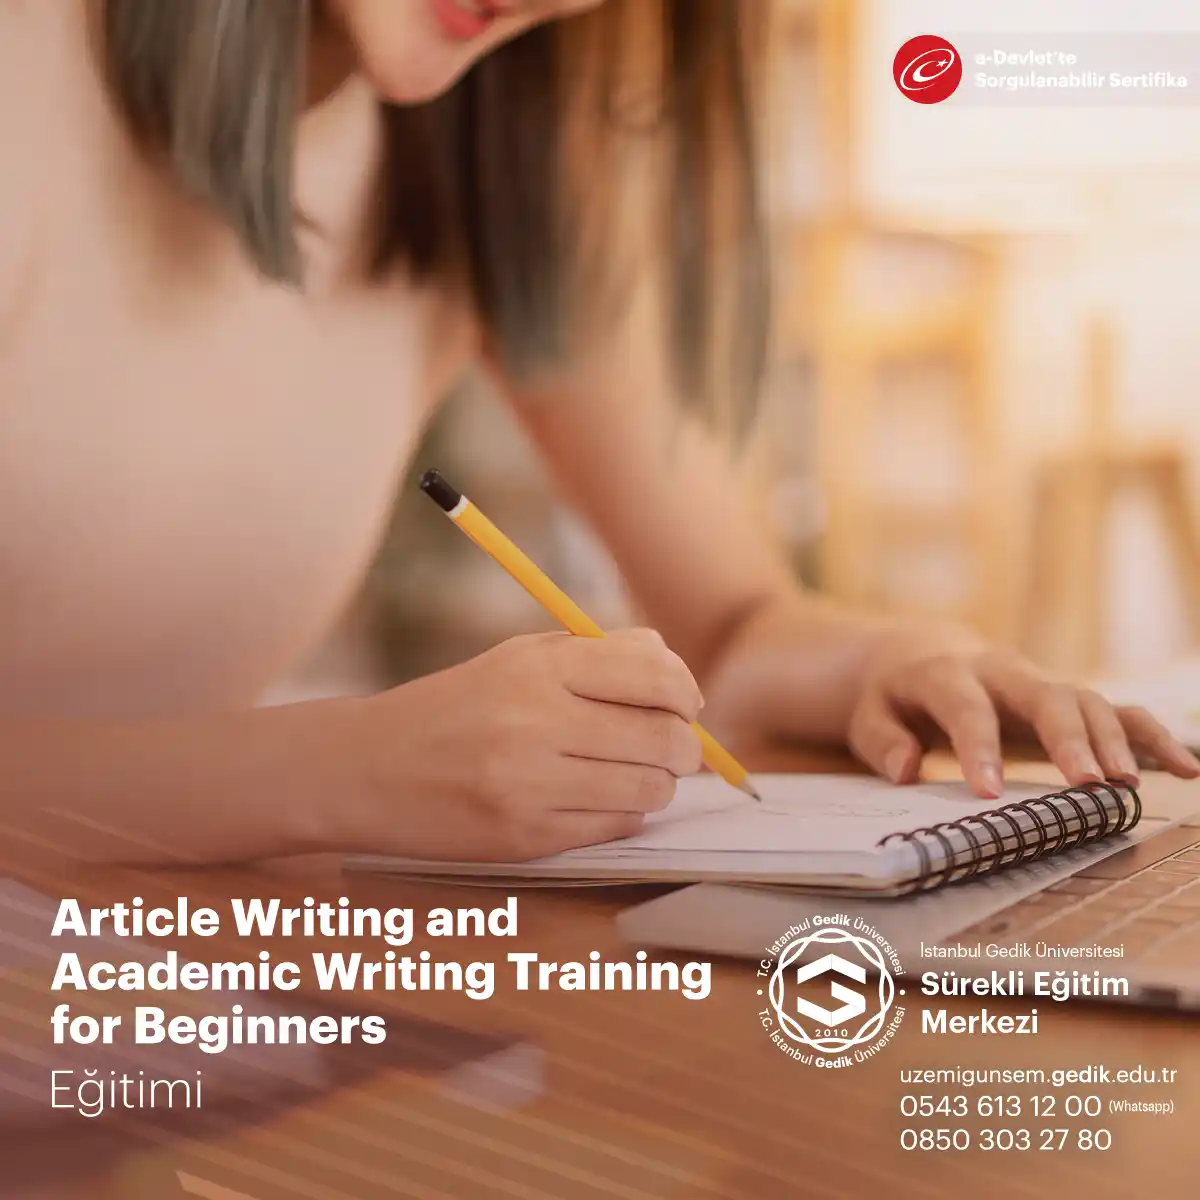 Article Writing and Academic Writing Training for Beginners